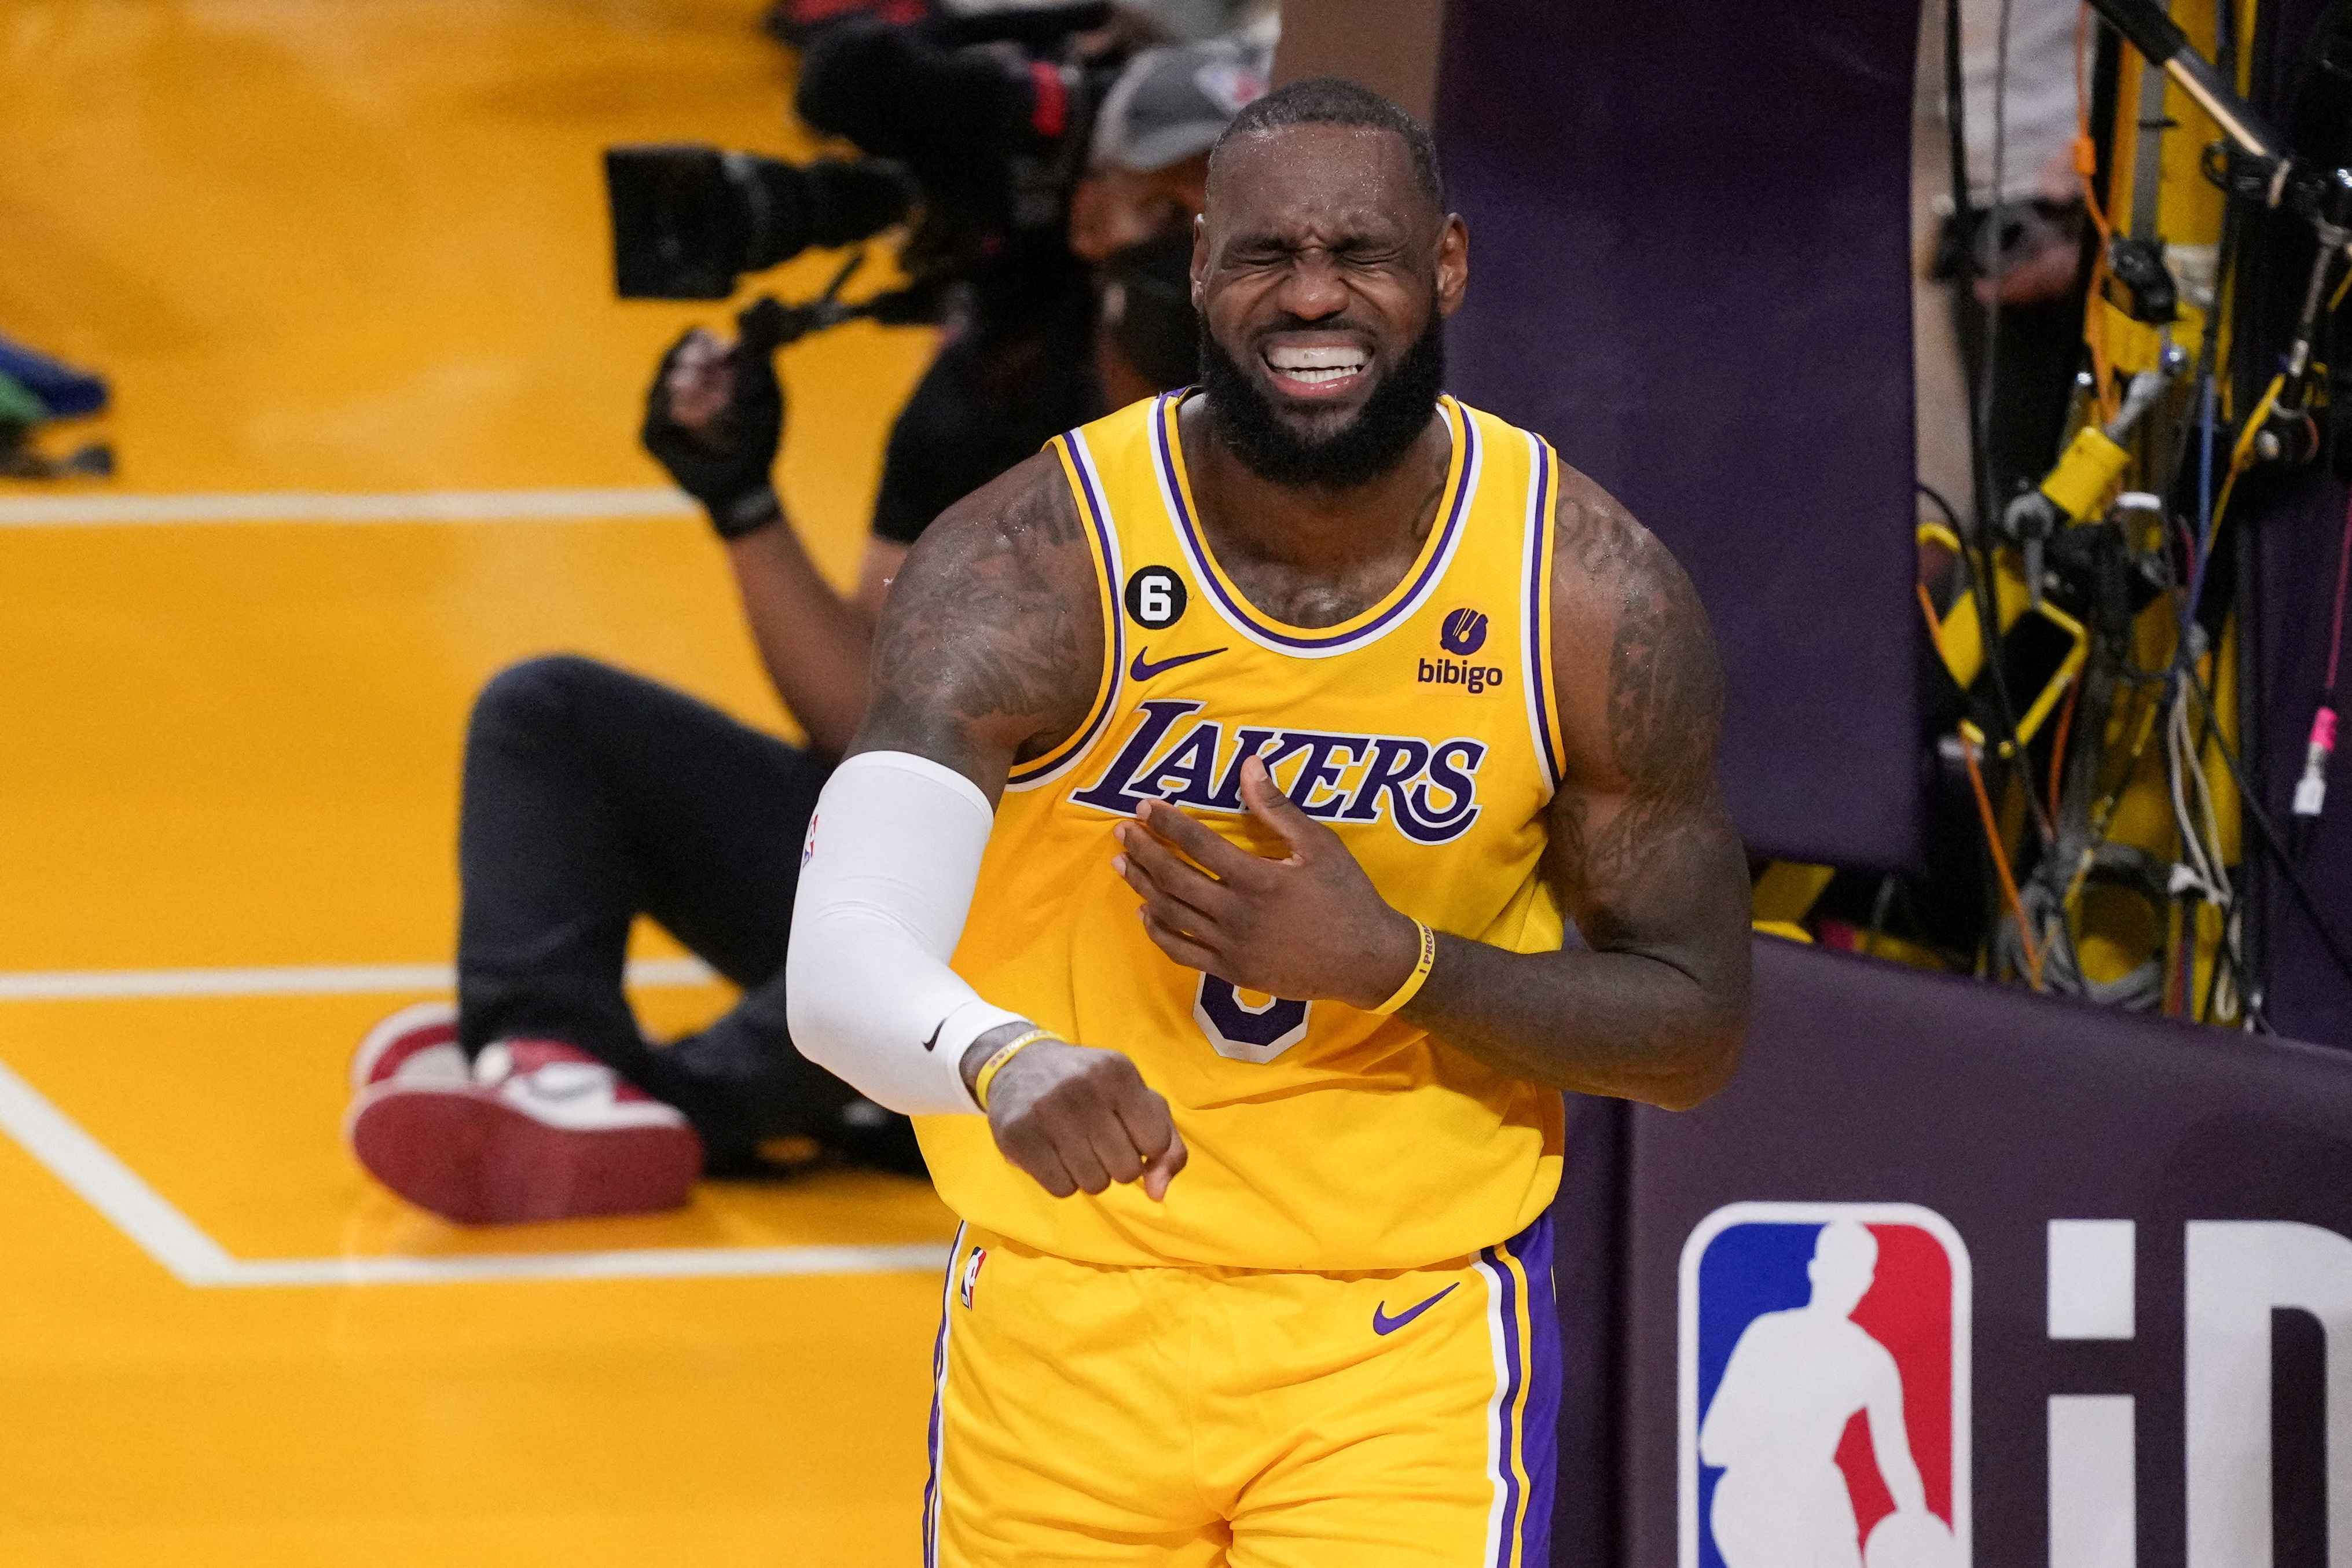 Lakers to speak with James in coming days about retirement comment